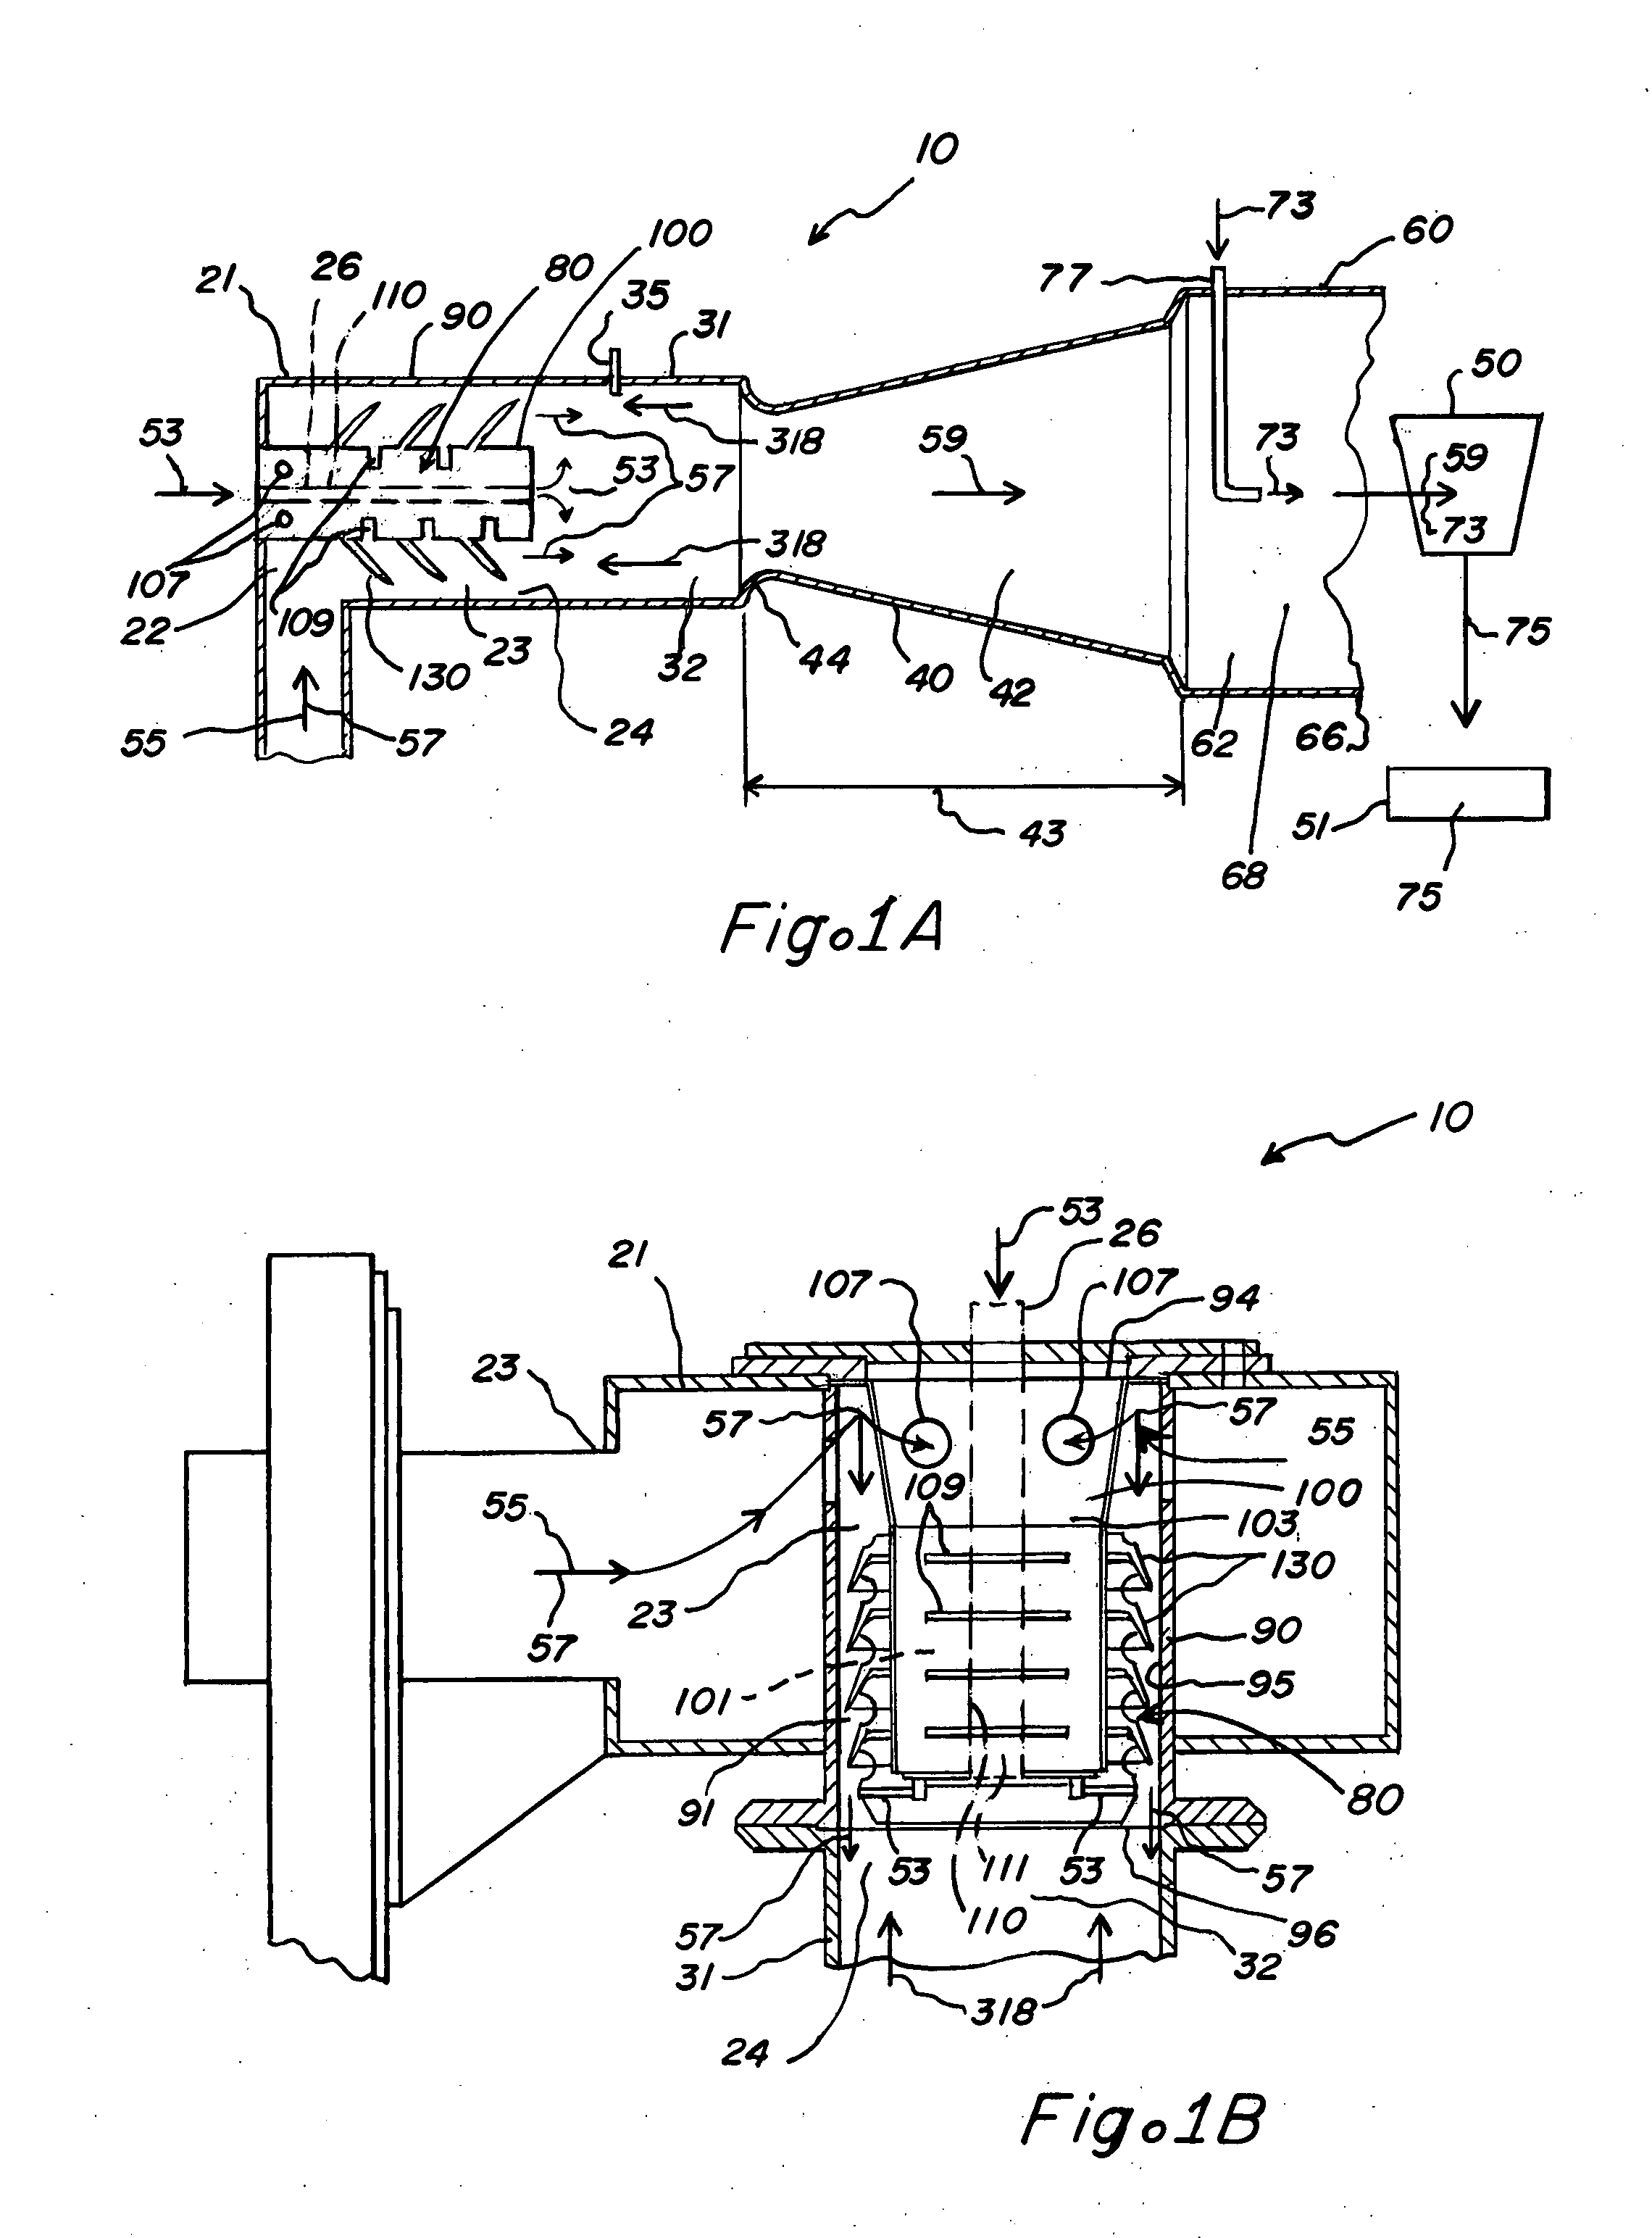 Pulse combustion dryer apparatus and methods